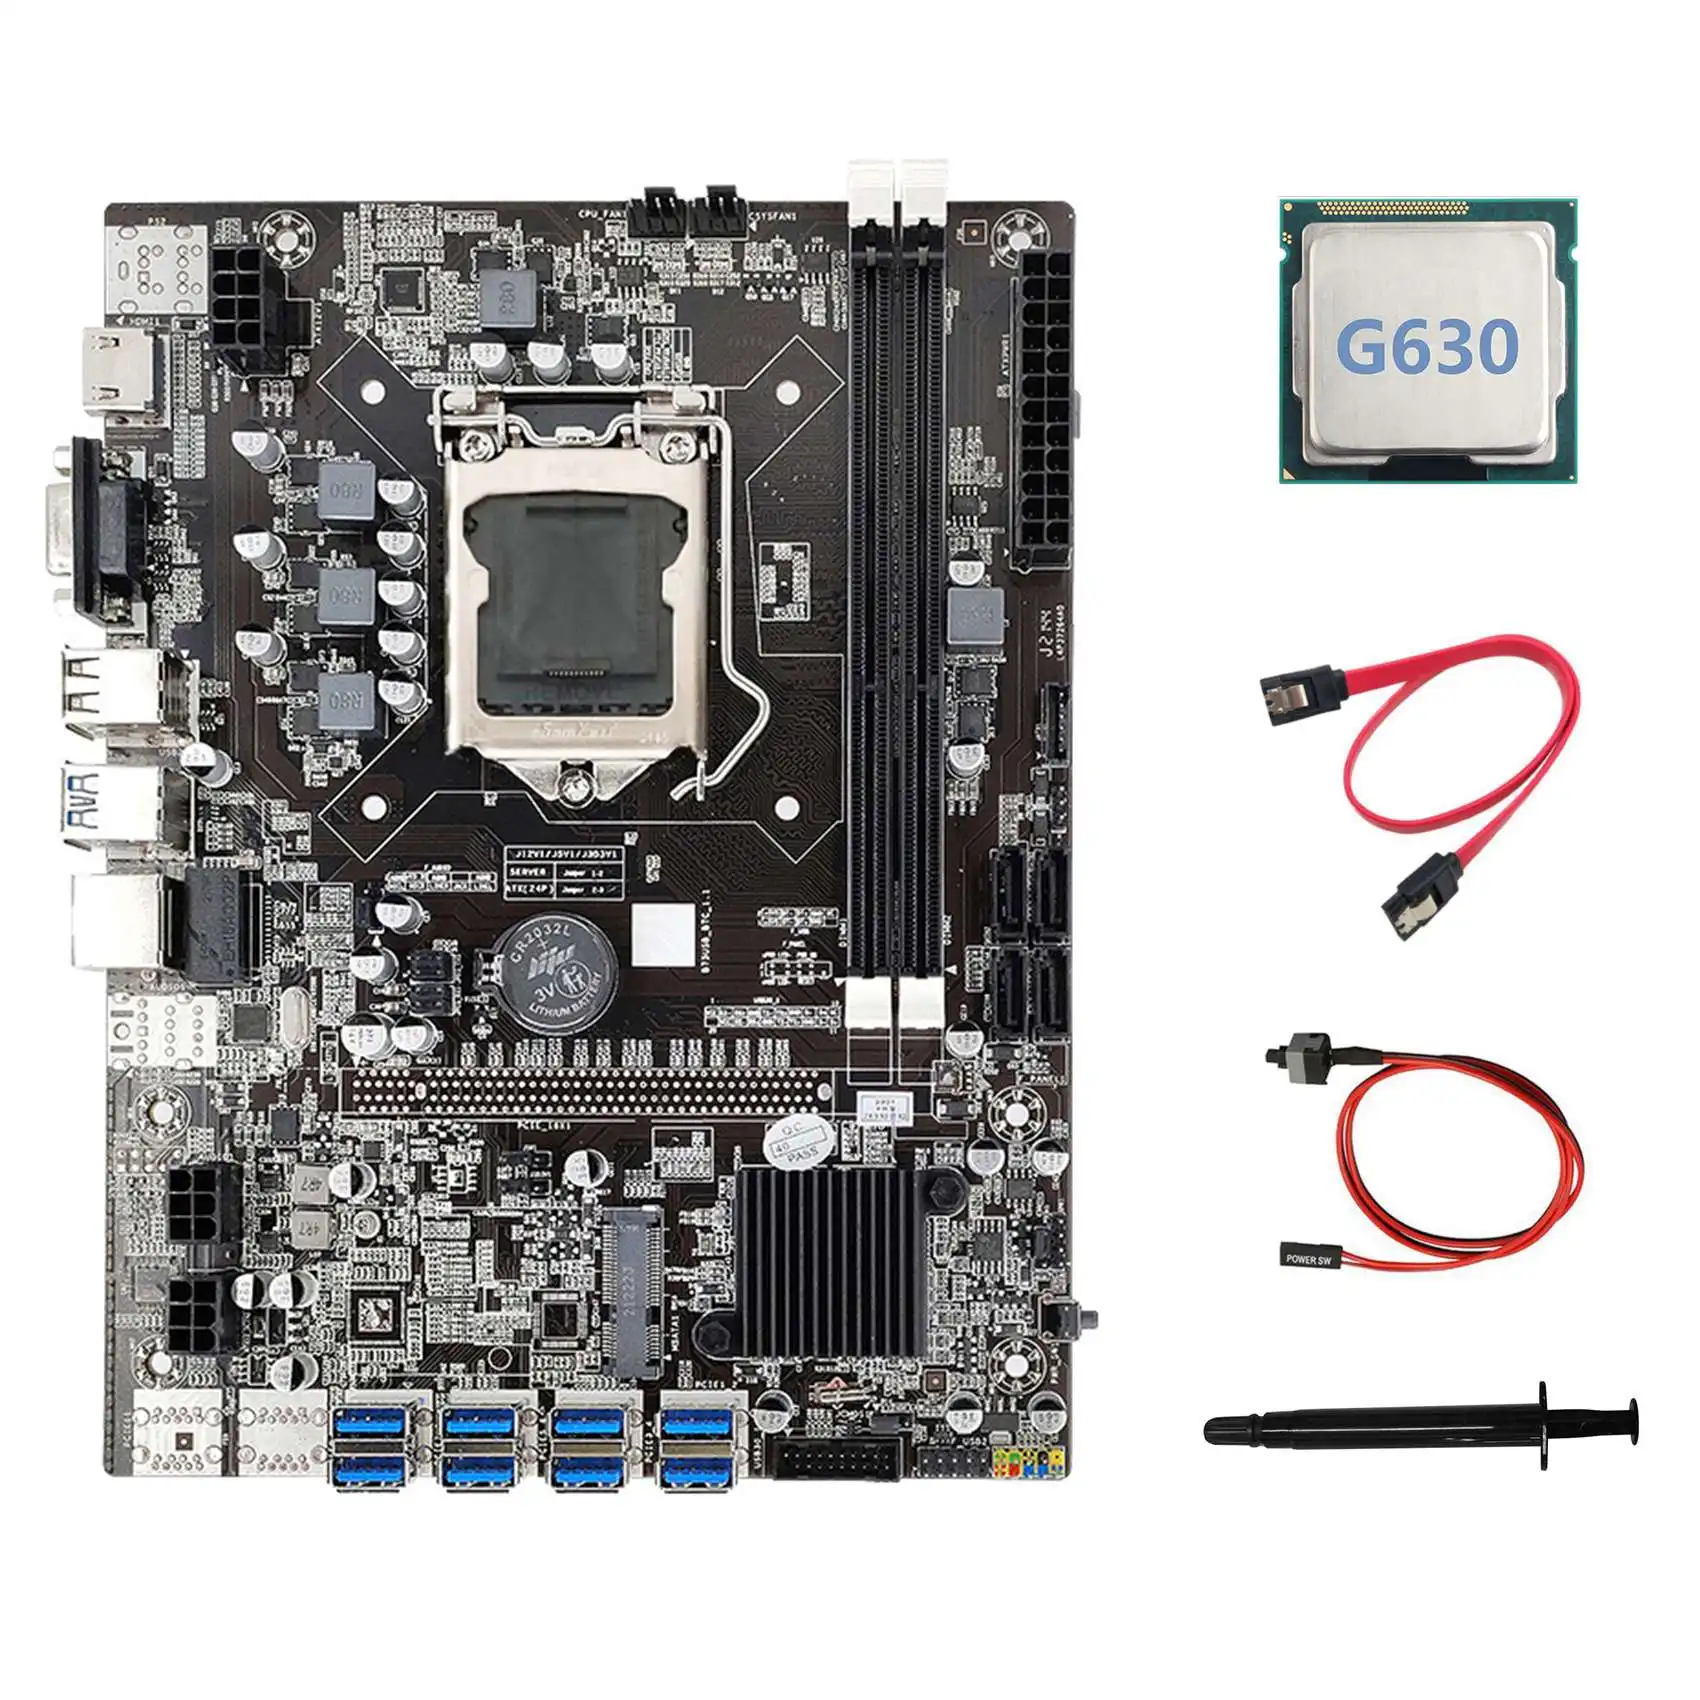 

B75 ETH Mining Motherboard 8XPCIE to USB+G630 CPU+Thermal Grease+SATA Cable+Switch Cable LGA1155 Miner Motherboard